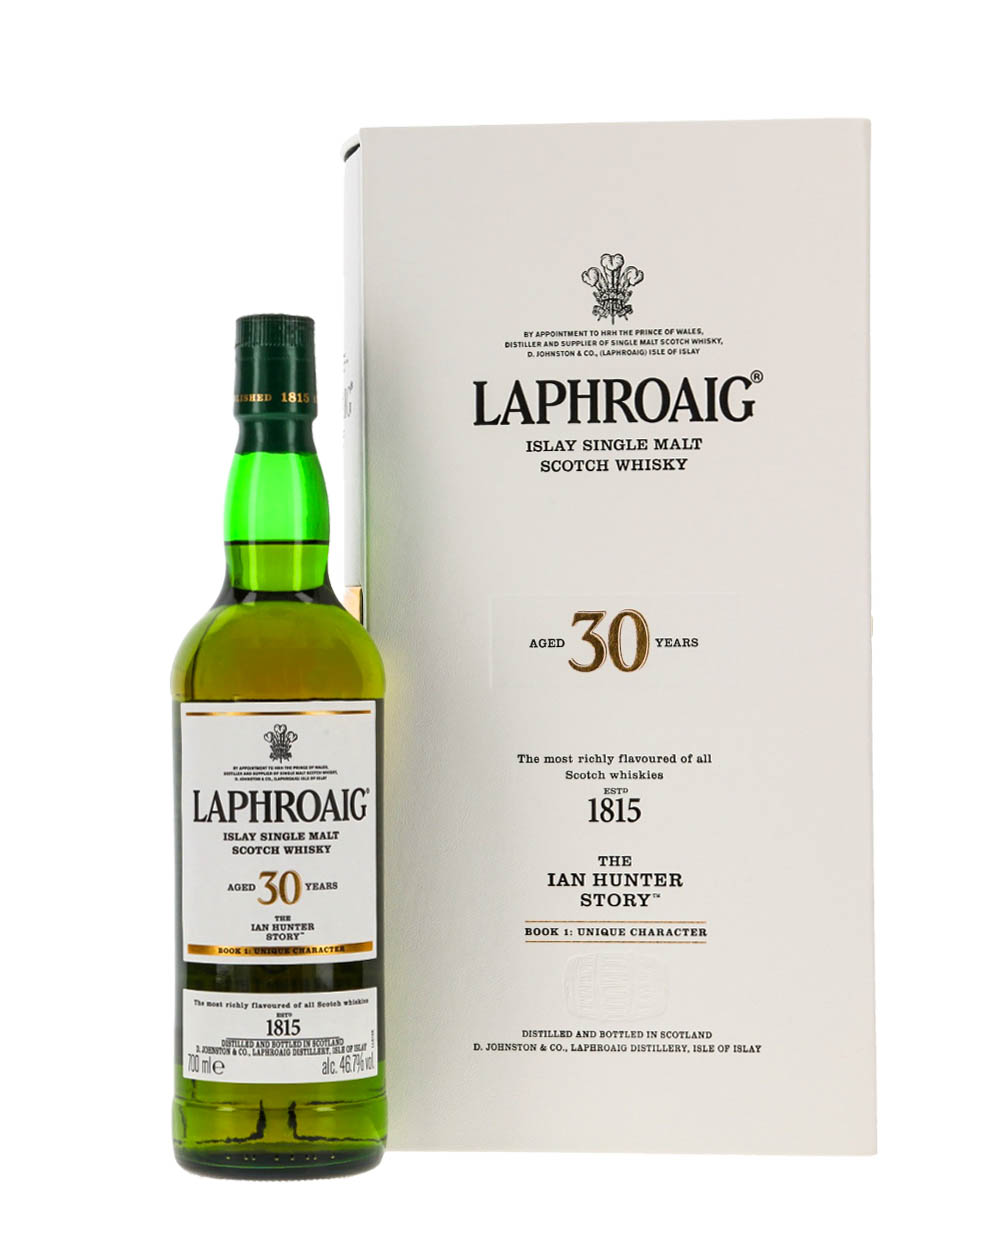 Laphroaig The Ian Hunter Story Book 1 (30 Years Old)